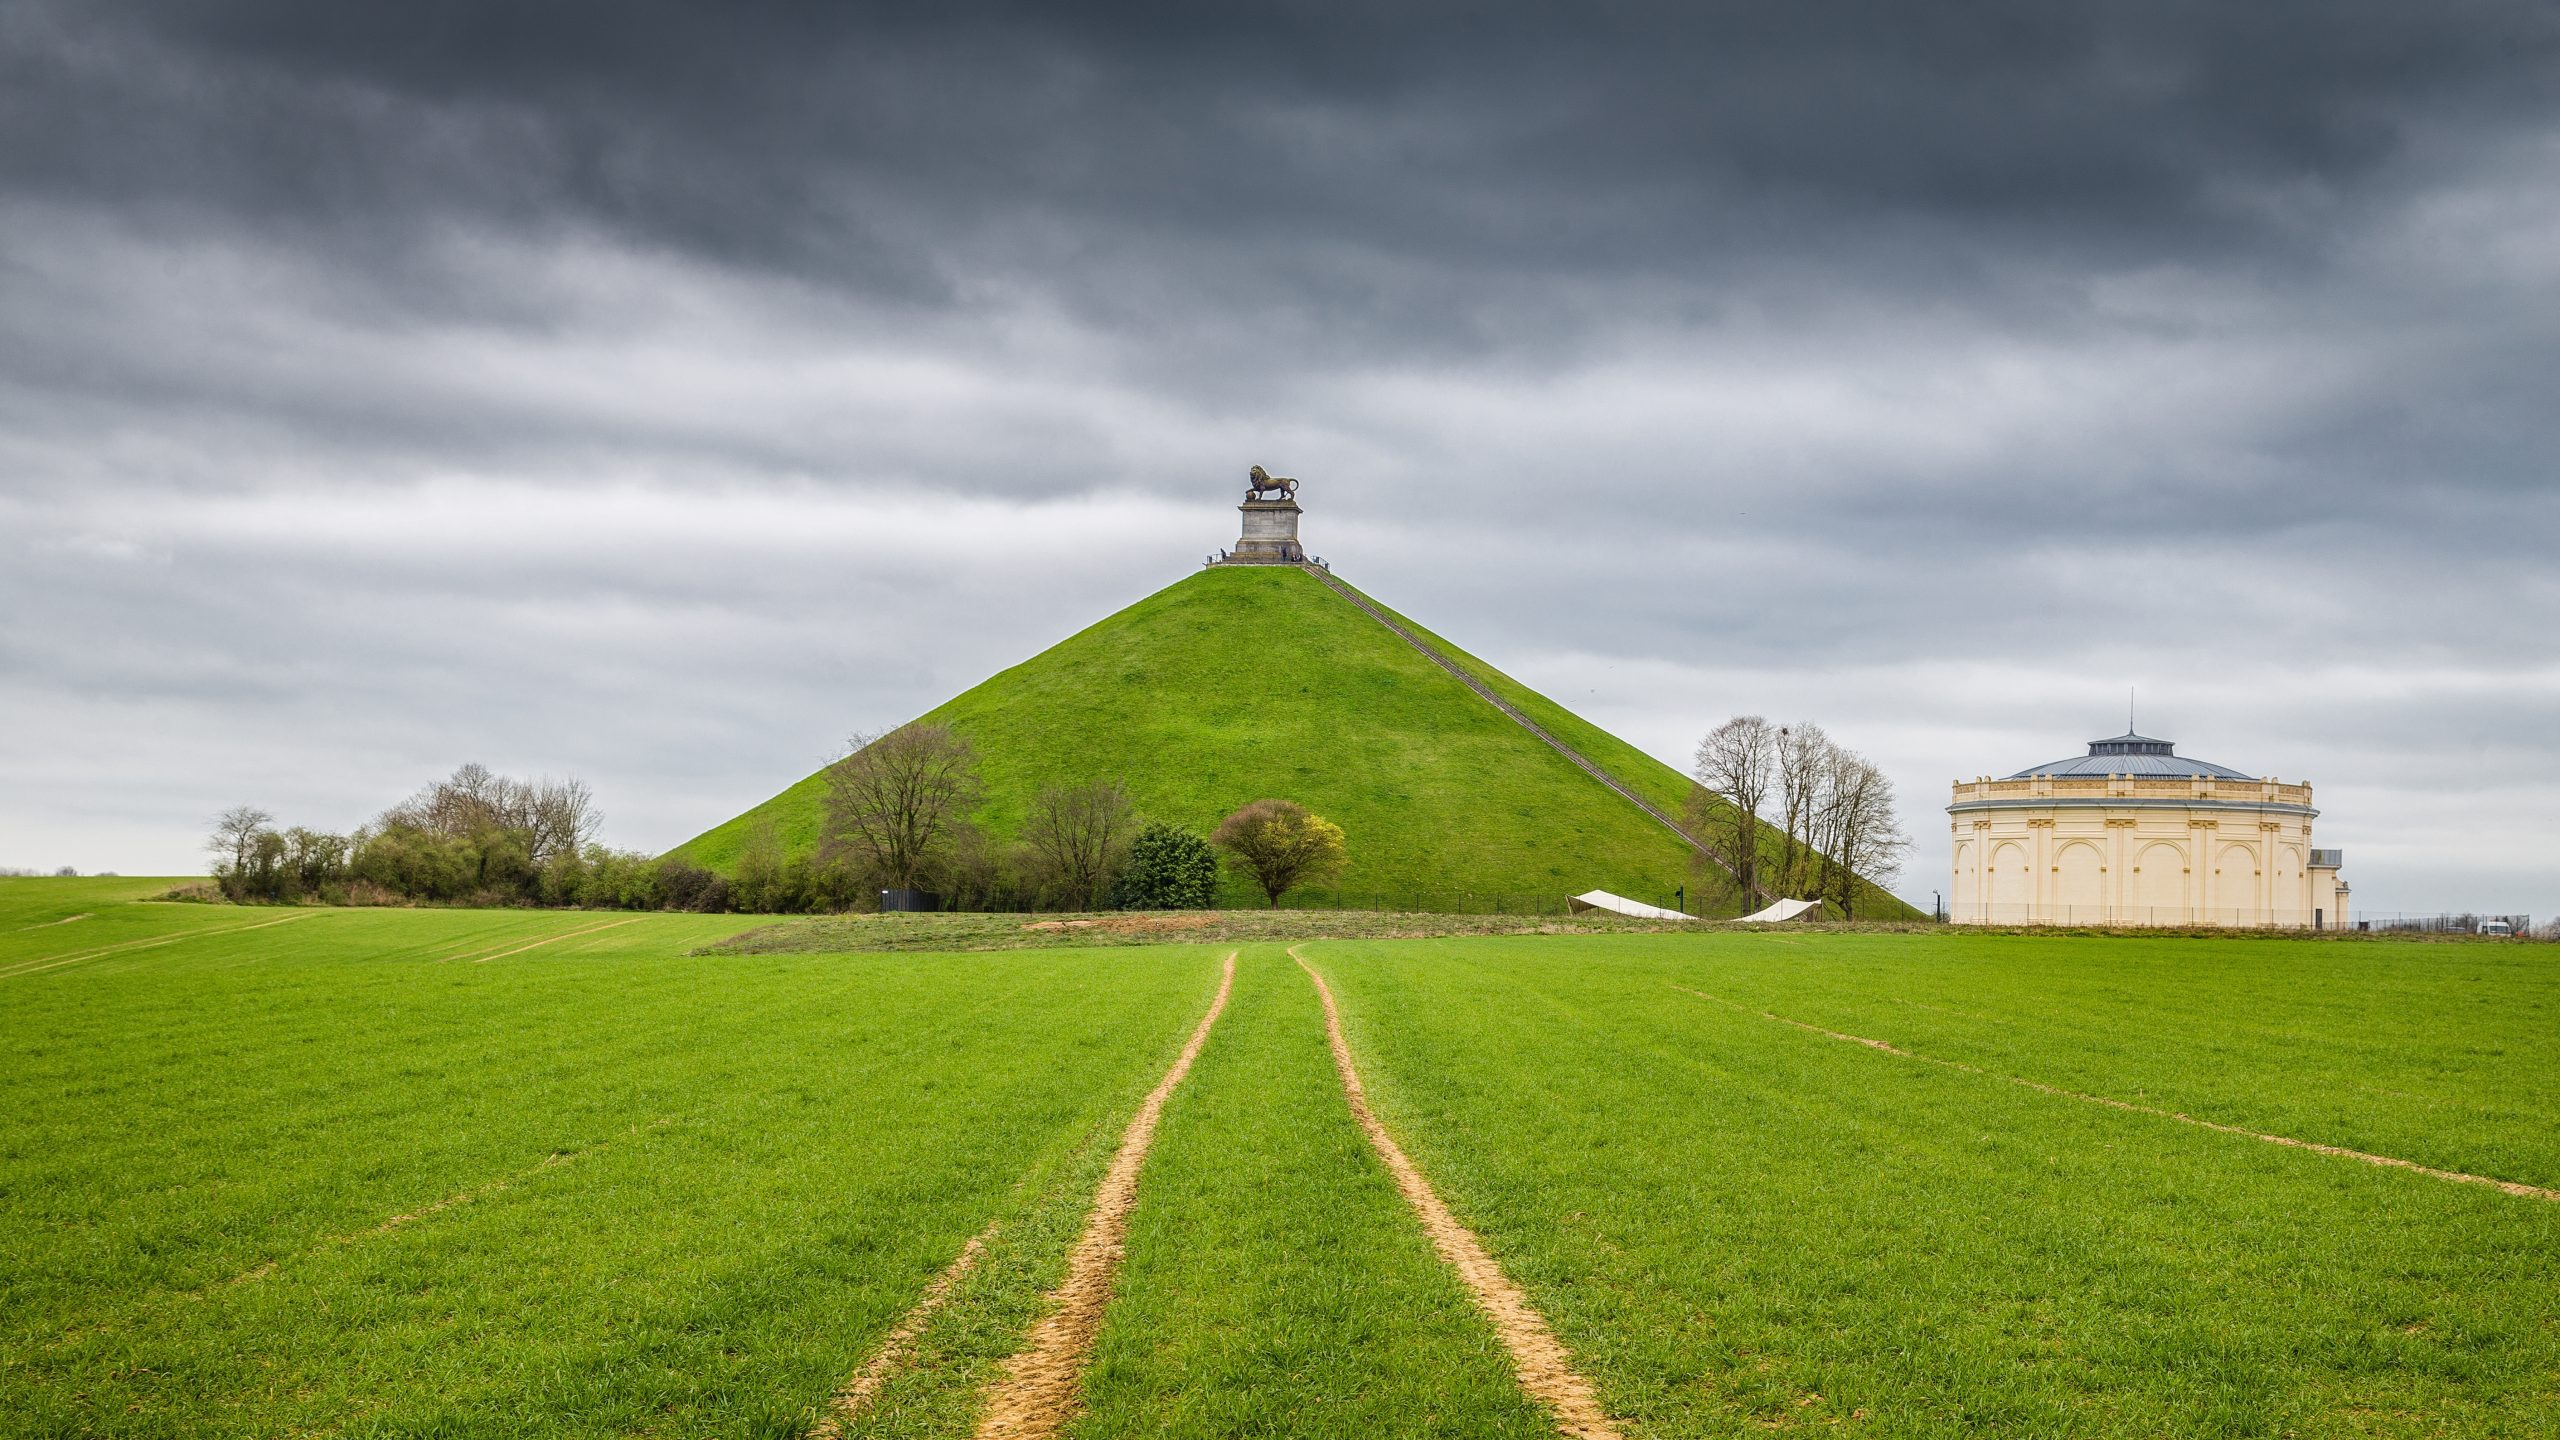 The last activity in the 10 best things to do in Belgium is to visit the Waterloo Battlefield